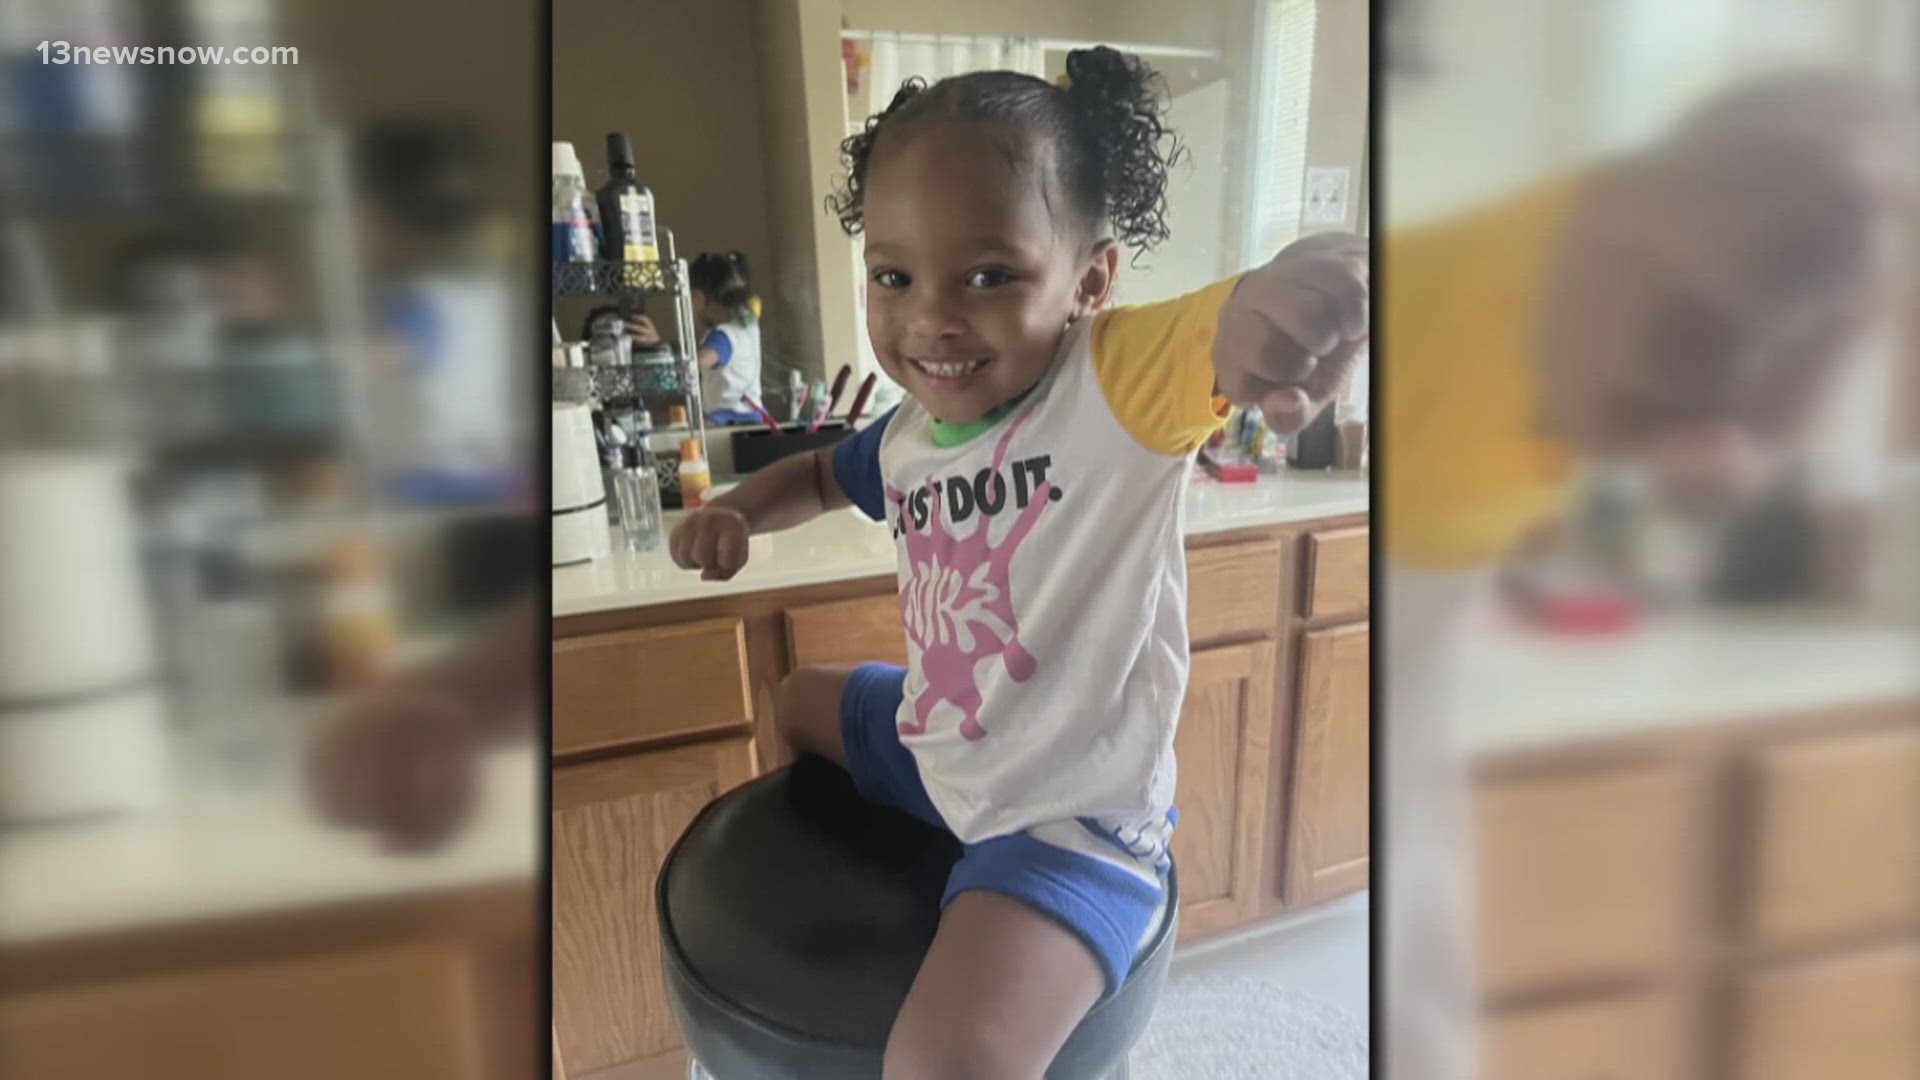 Samalea Daniels was first reported missing by her father in North Carolina on June 20. Police believed her mother, Tianna Daniels, brought her to Virginia Beach.